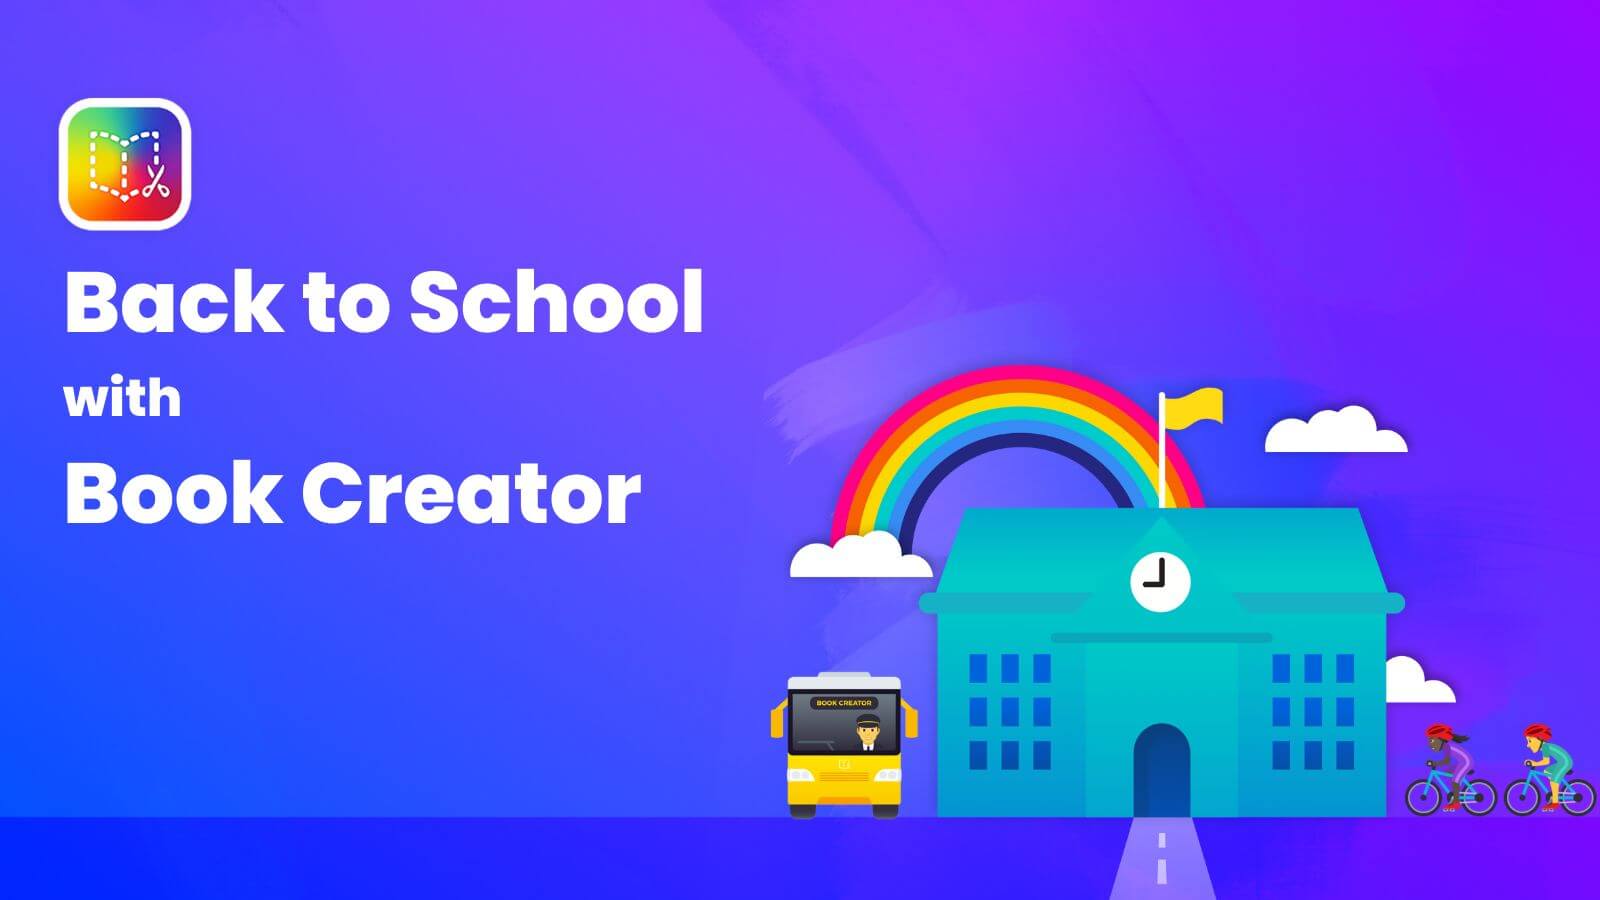 Featured image for “Back to School with Book Creator”